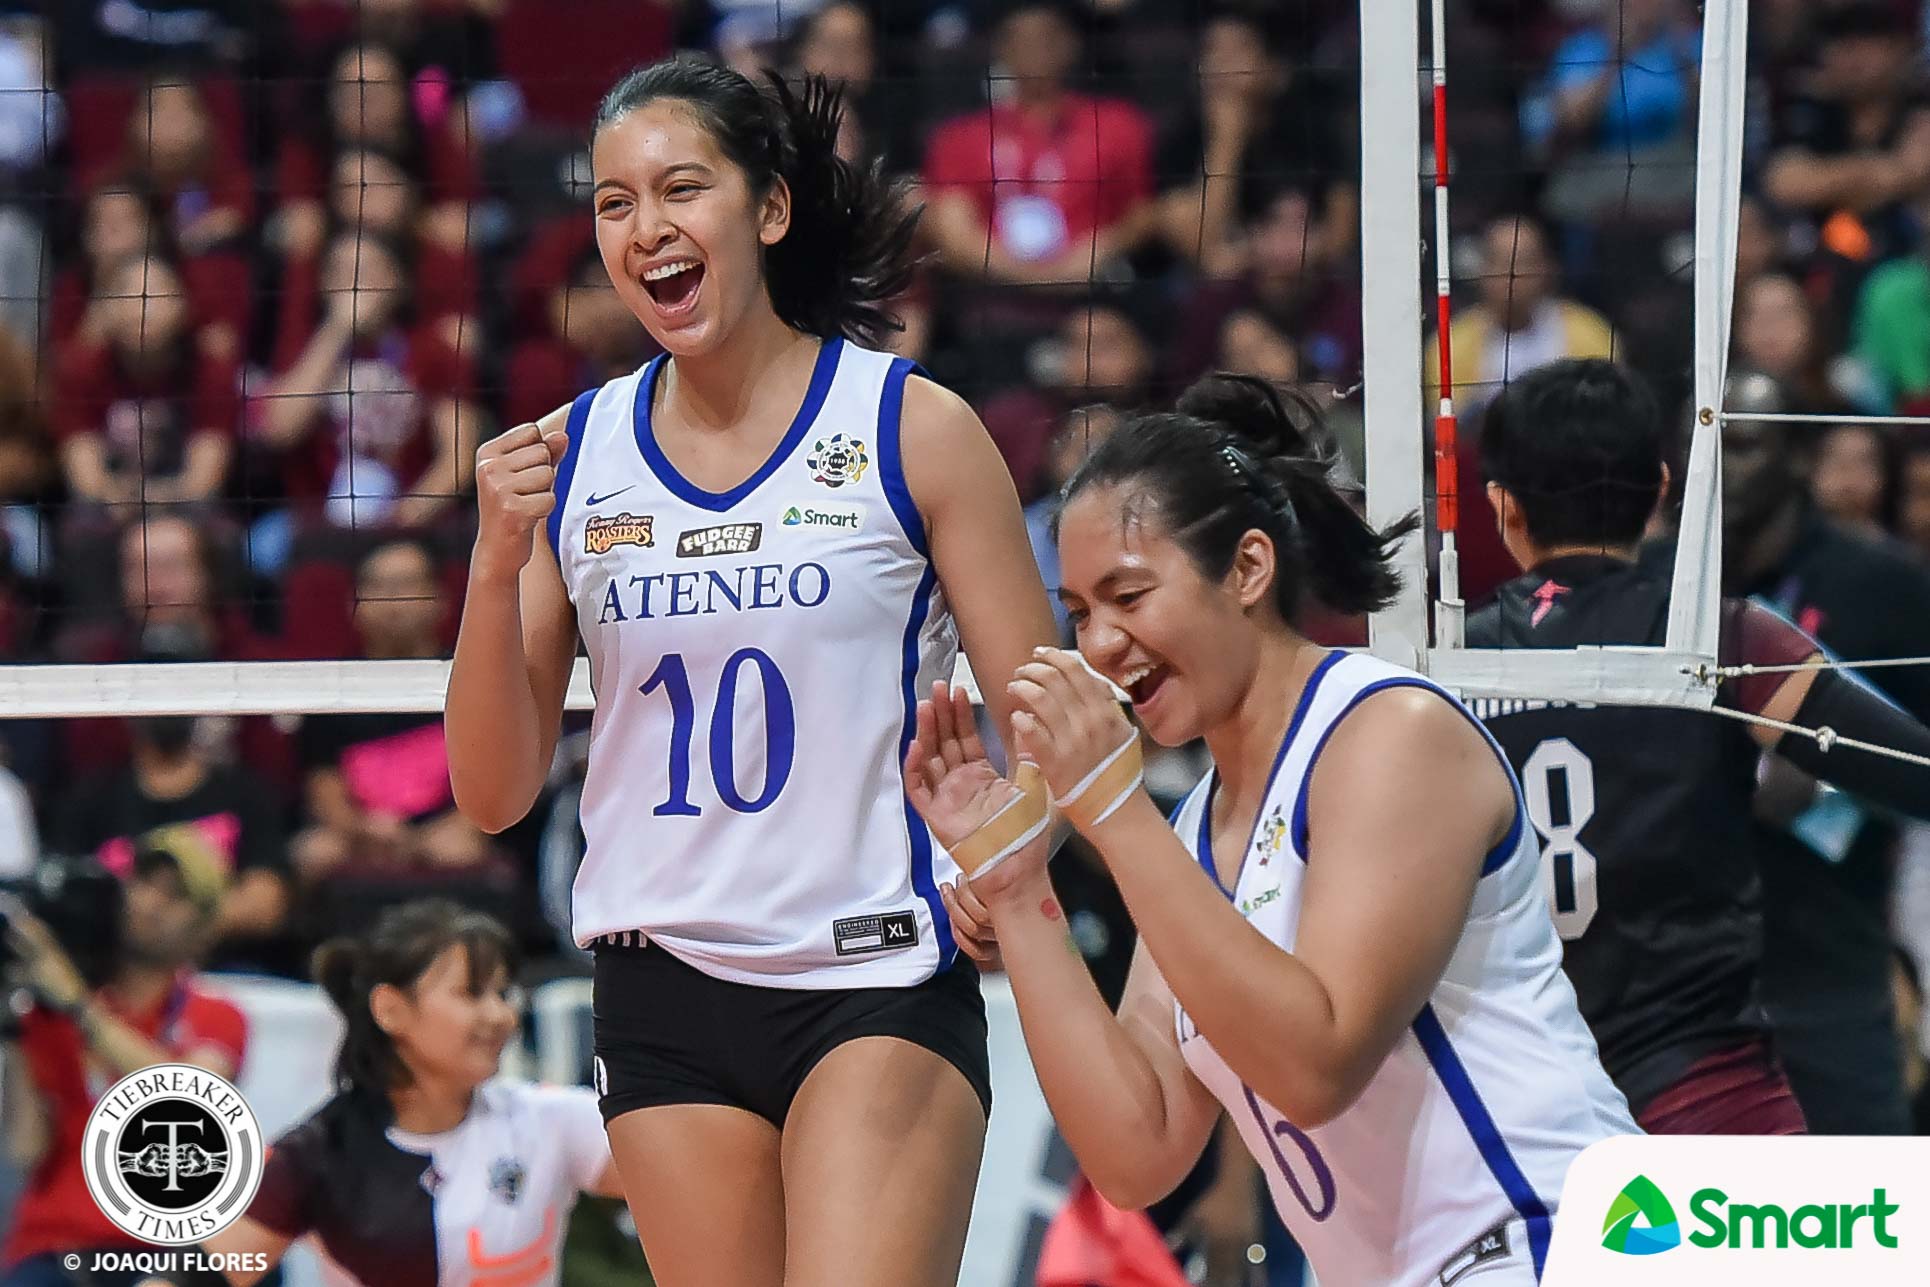 UAAP-82-Volleyball-UP-vs.-ADMU-Tolentino-8201 Kat Tolentino vows to be the leader Ateneo needs in final year ADMU News UAAP Volleyball  - philippine sports news